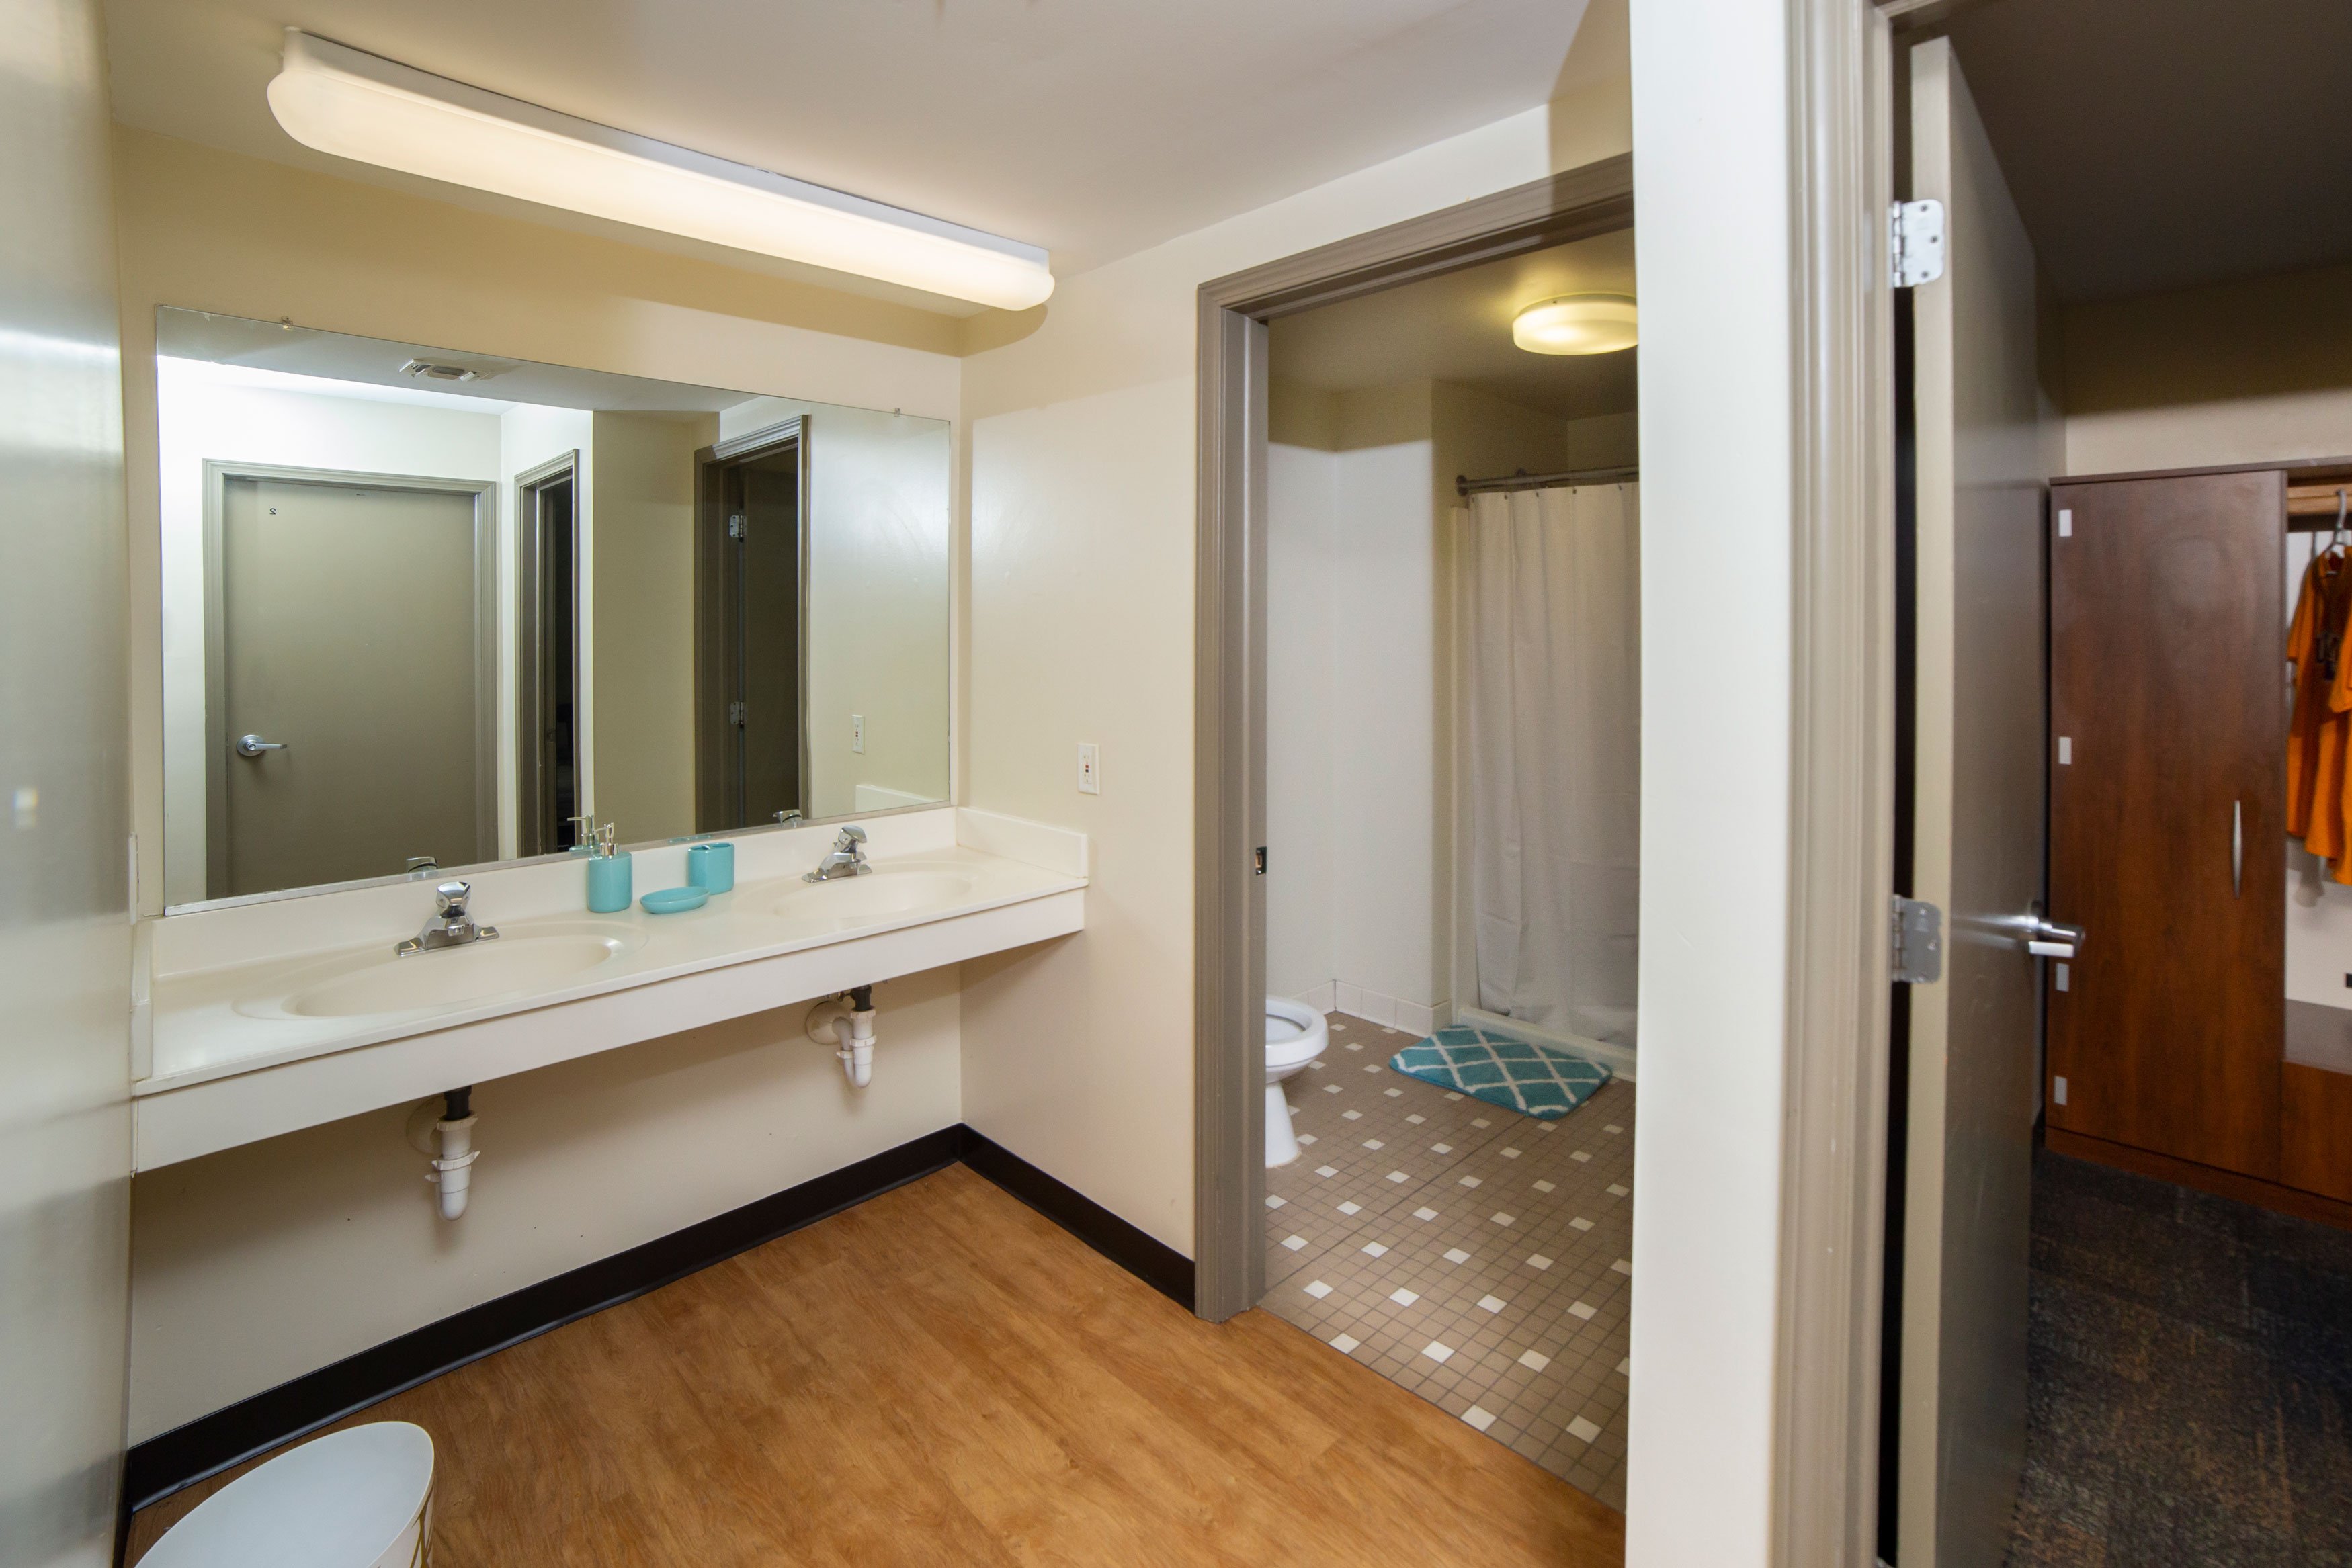 A two room bathroom, with a double sink in one room and a toilet and shower in the other adjoining room.